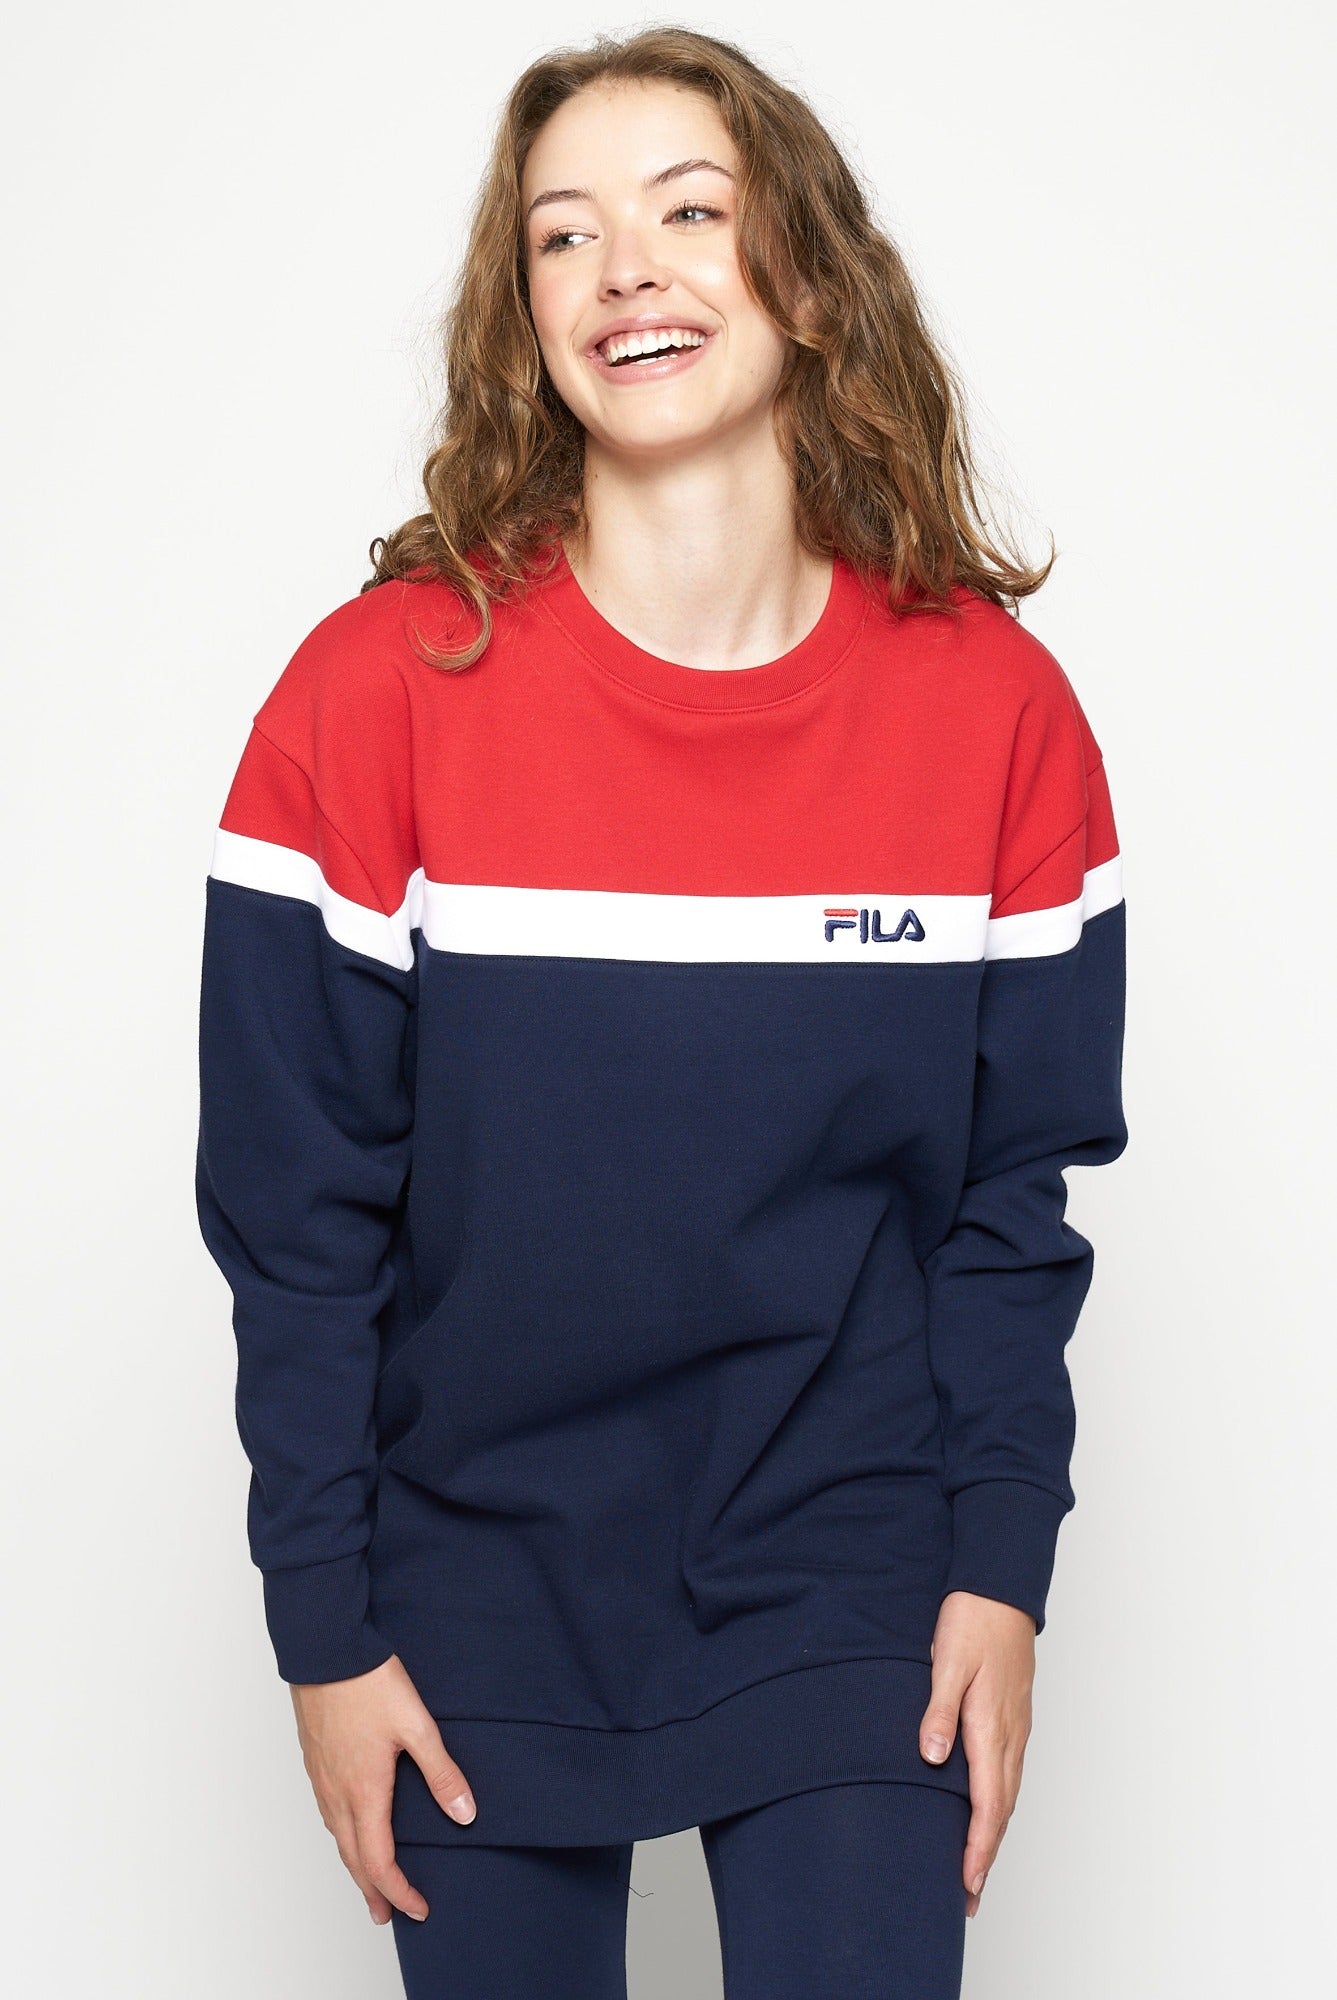 Collections – Fila South Africa